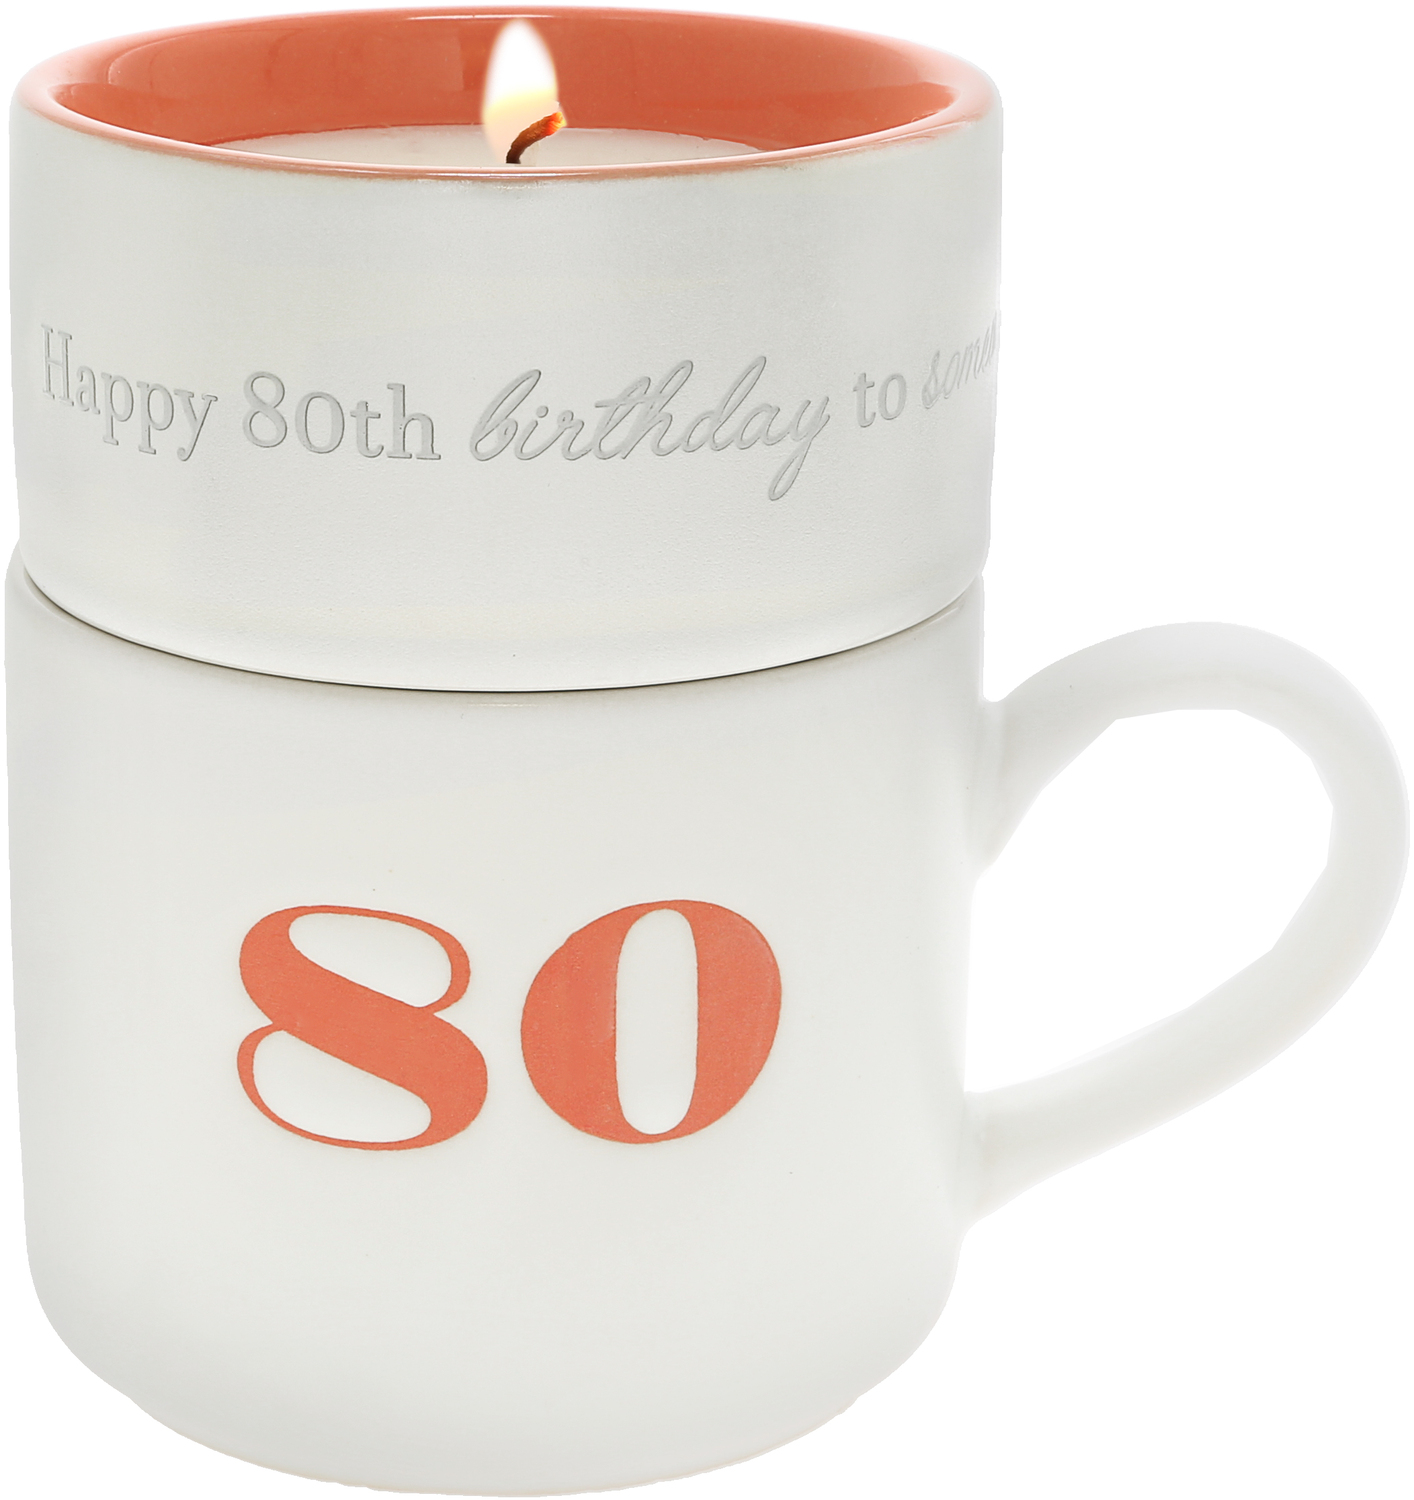 80 by Filled with Warmth - 80 - Stacking Mug and Candle Set
100% Soy Wax Scent: Tranquility